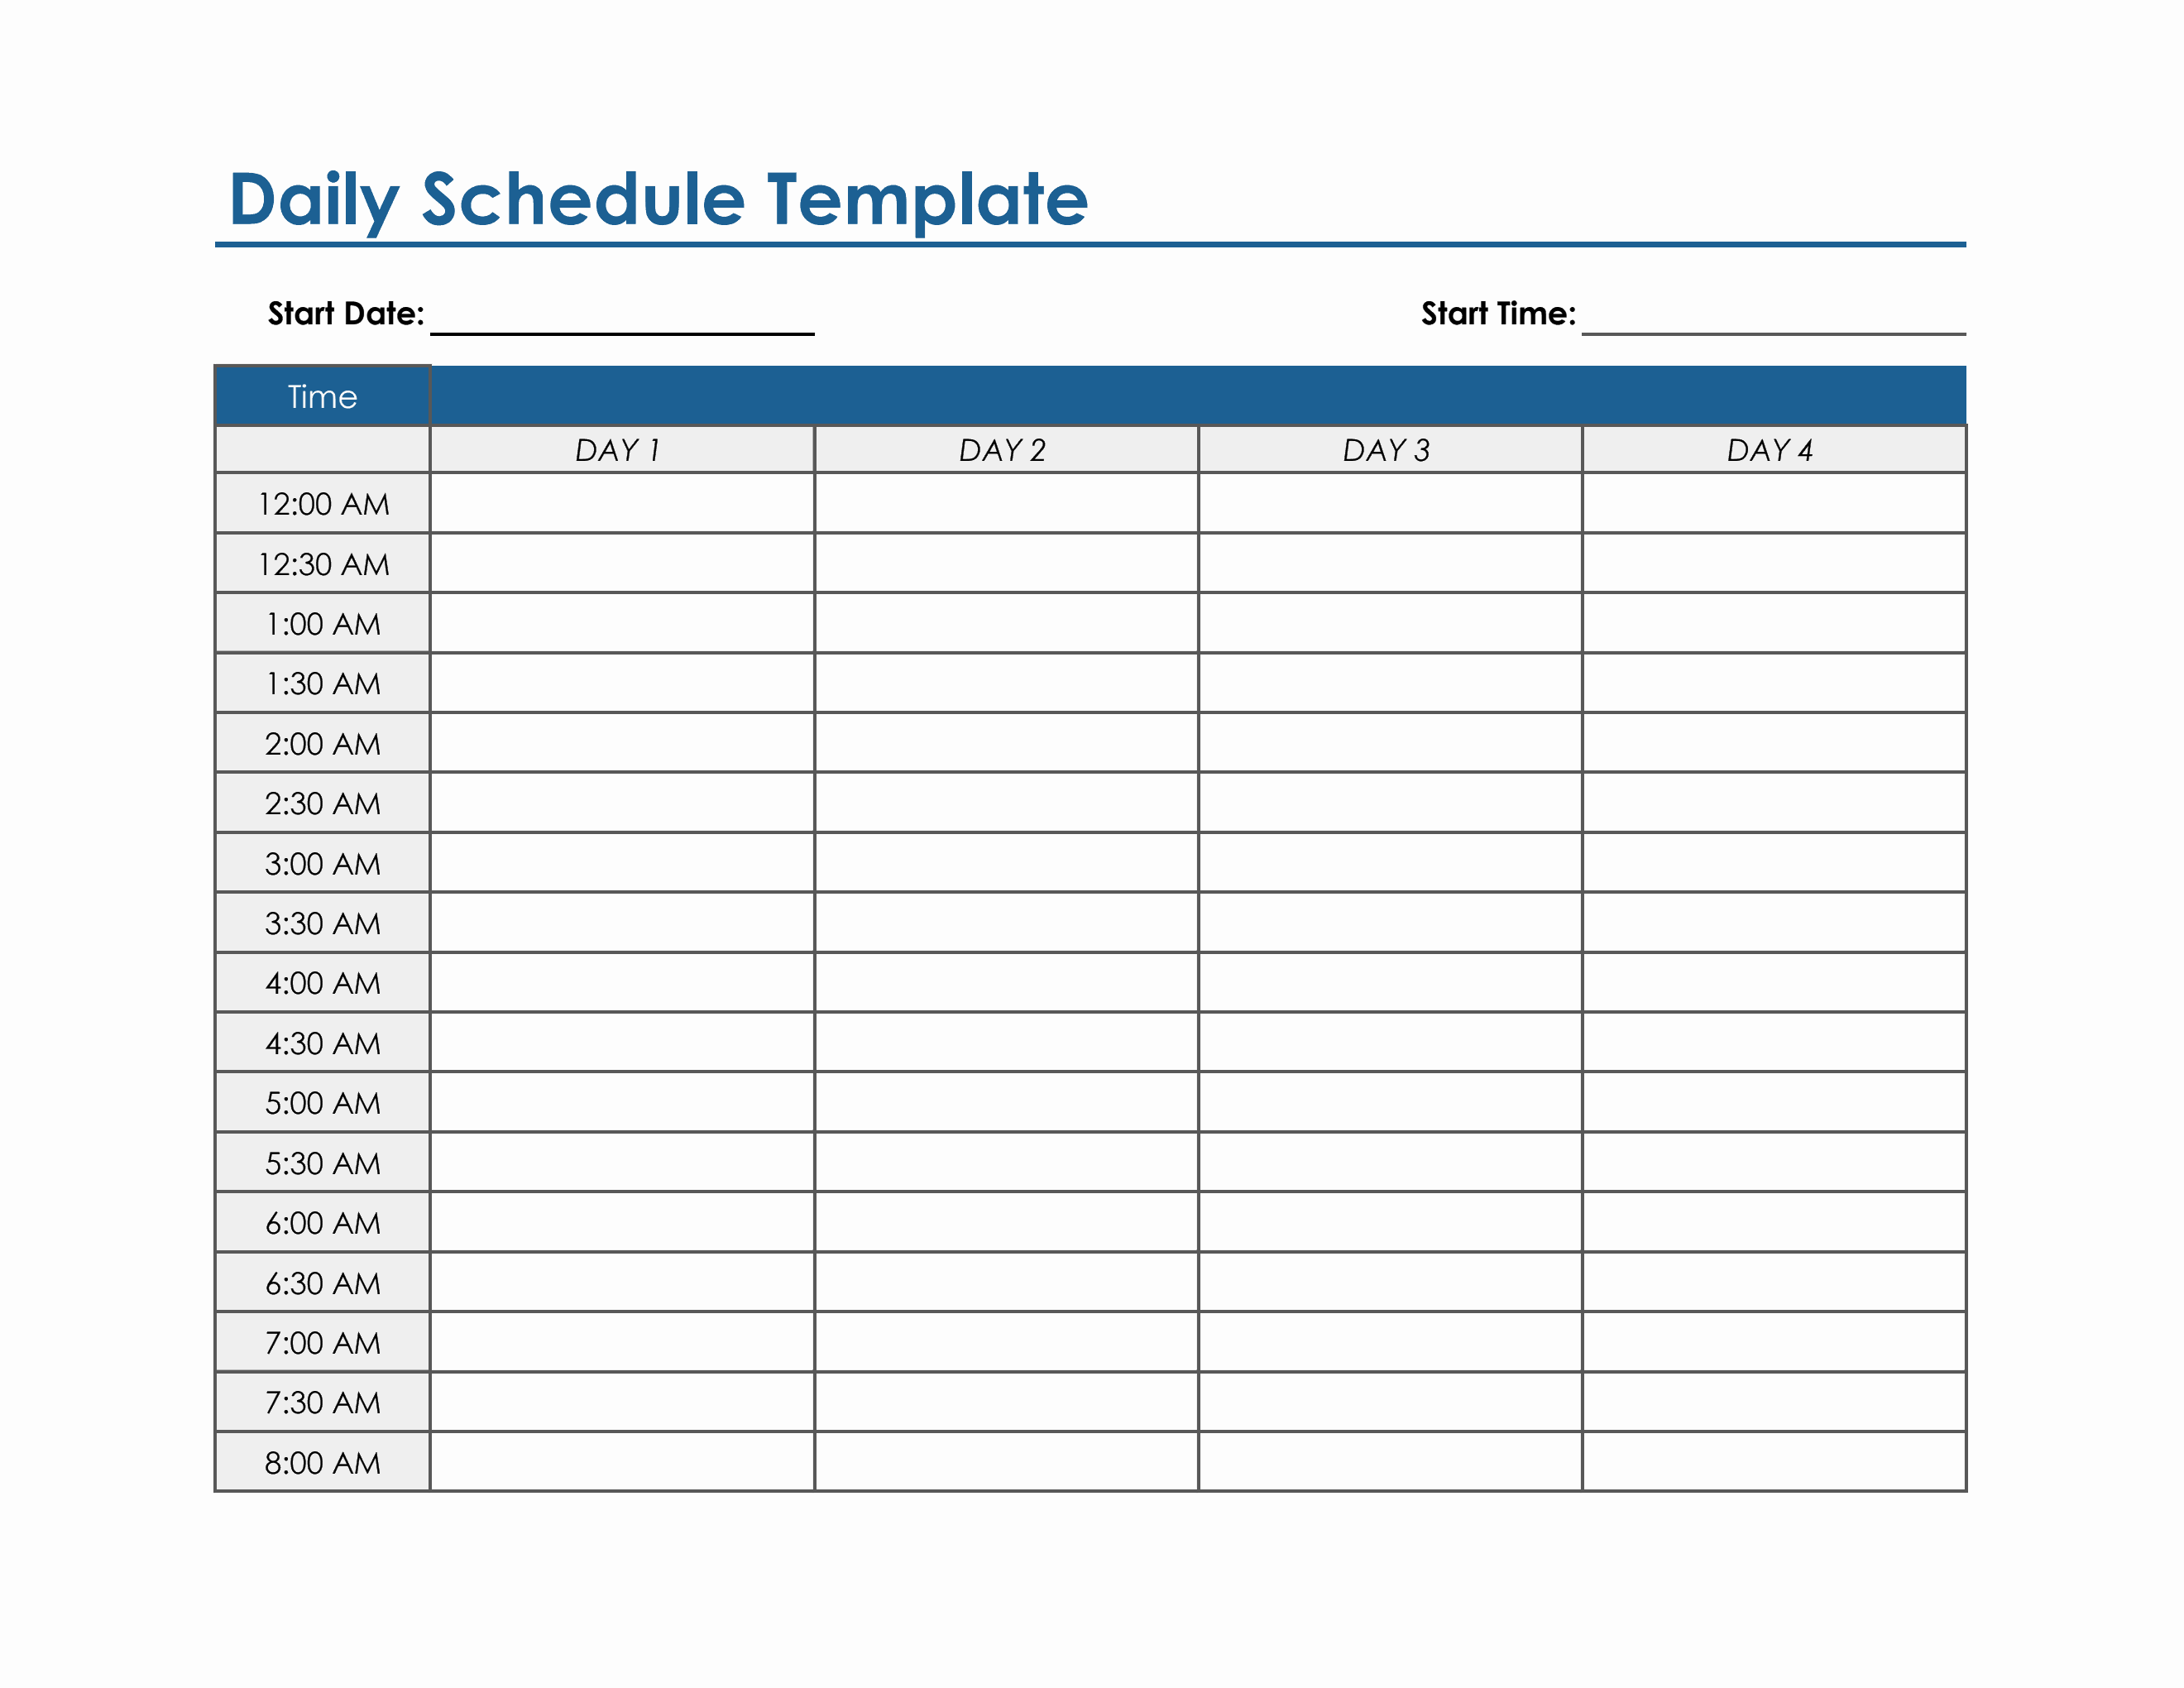 t-png-text-work-editable-daily-schedule-template-office-timeline-daily-schedule-template